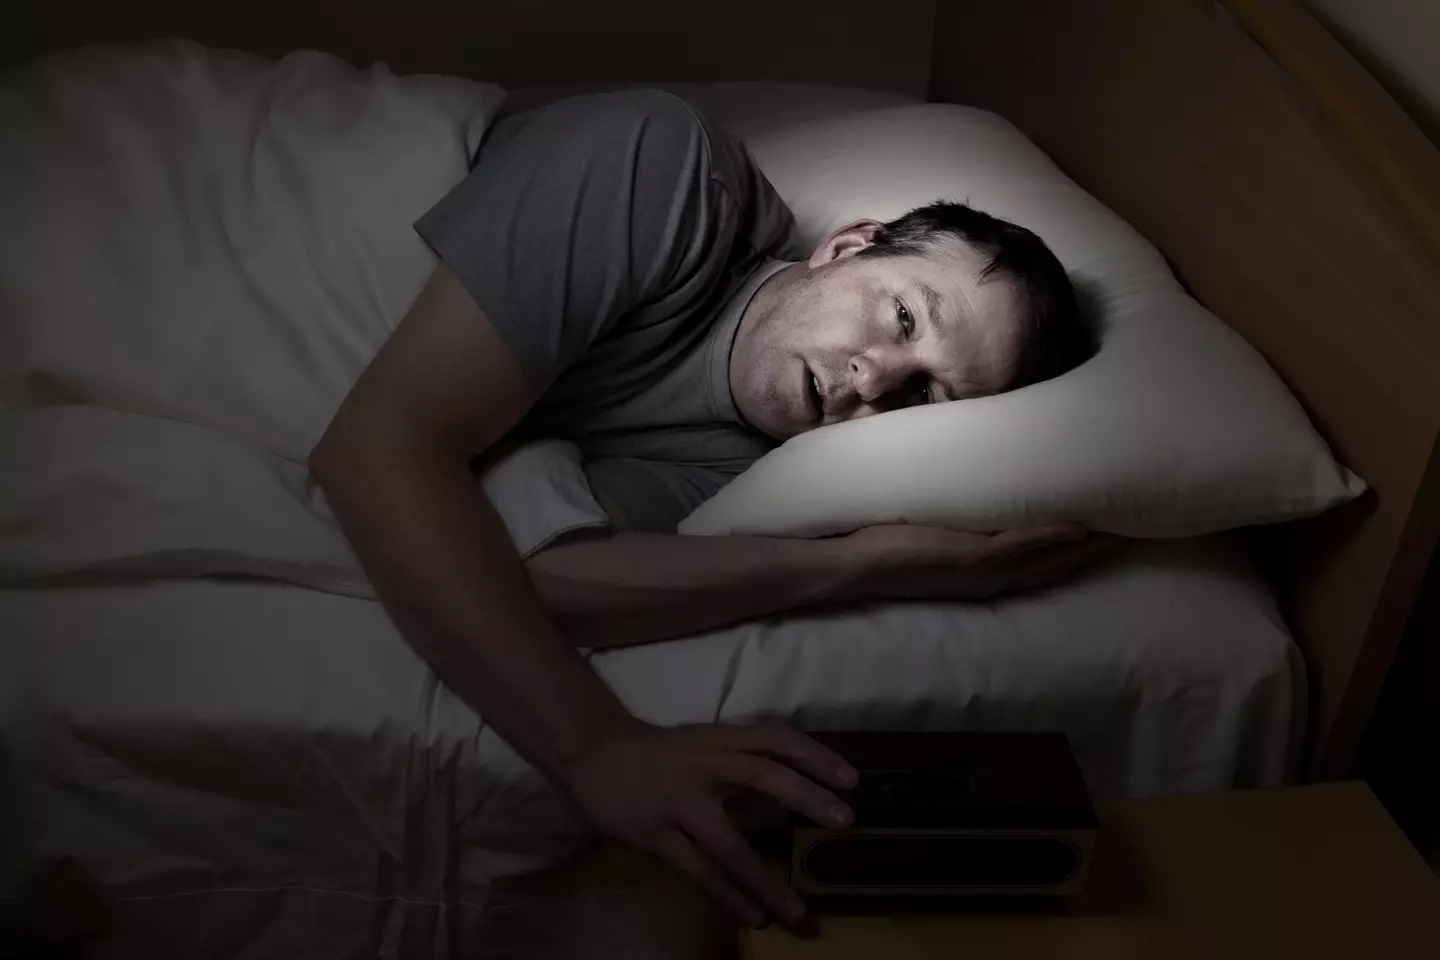 A new study found not enough sleep puts us at higher risk of serious illness.